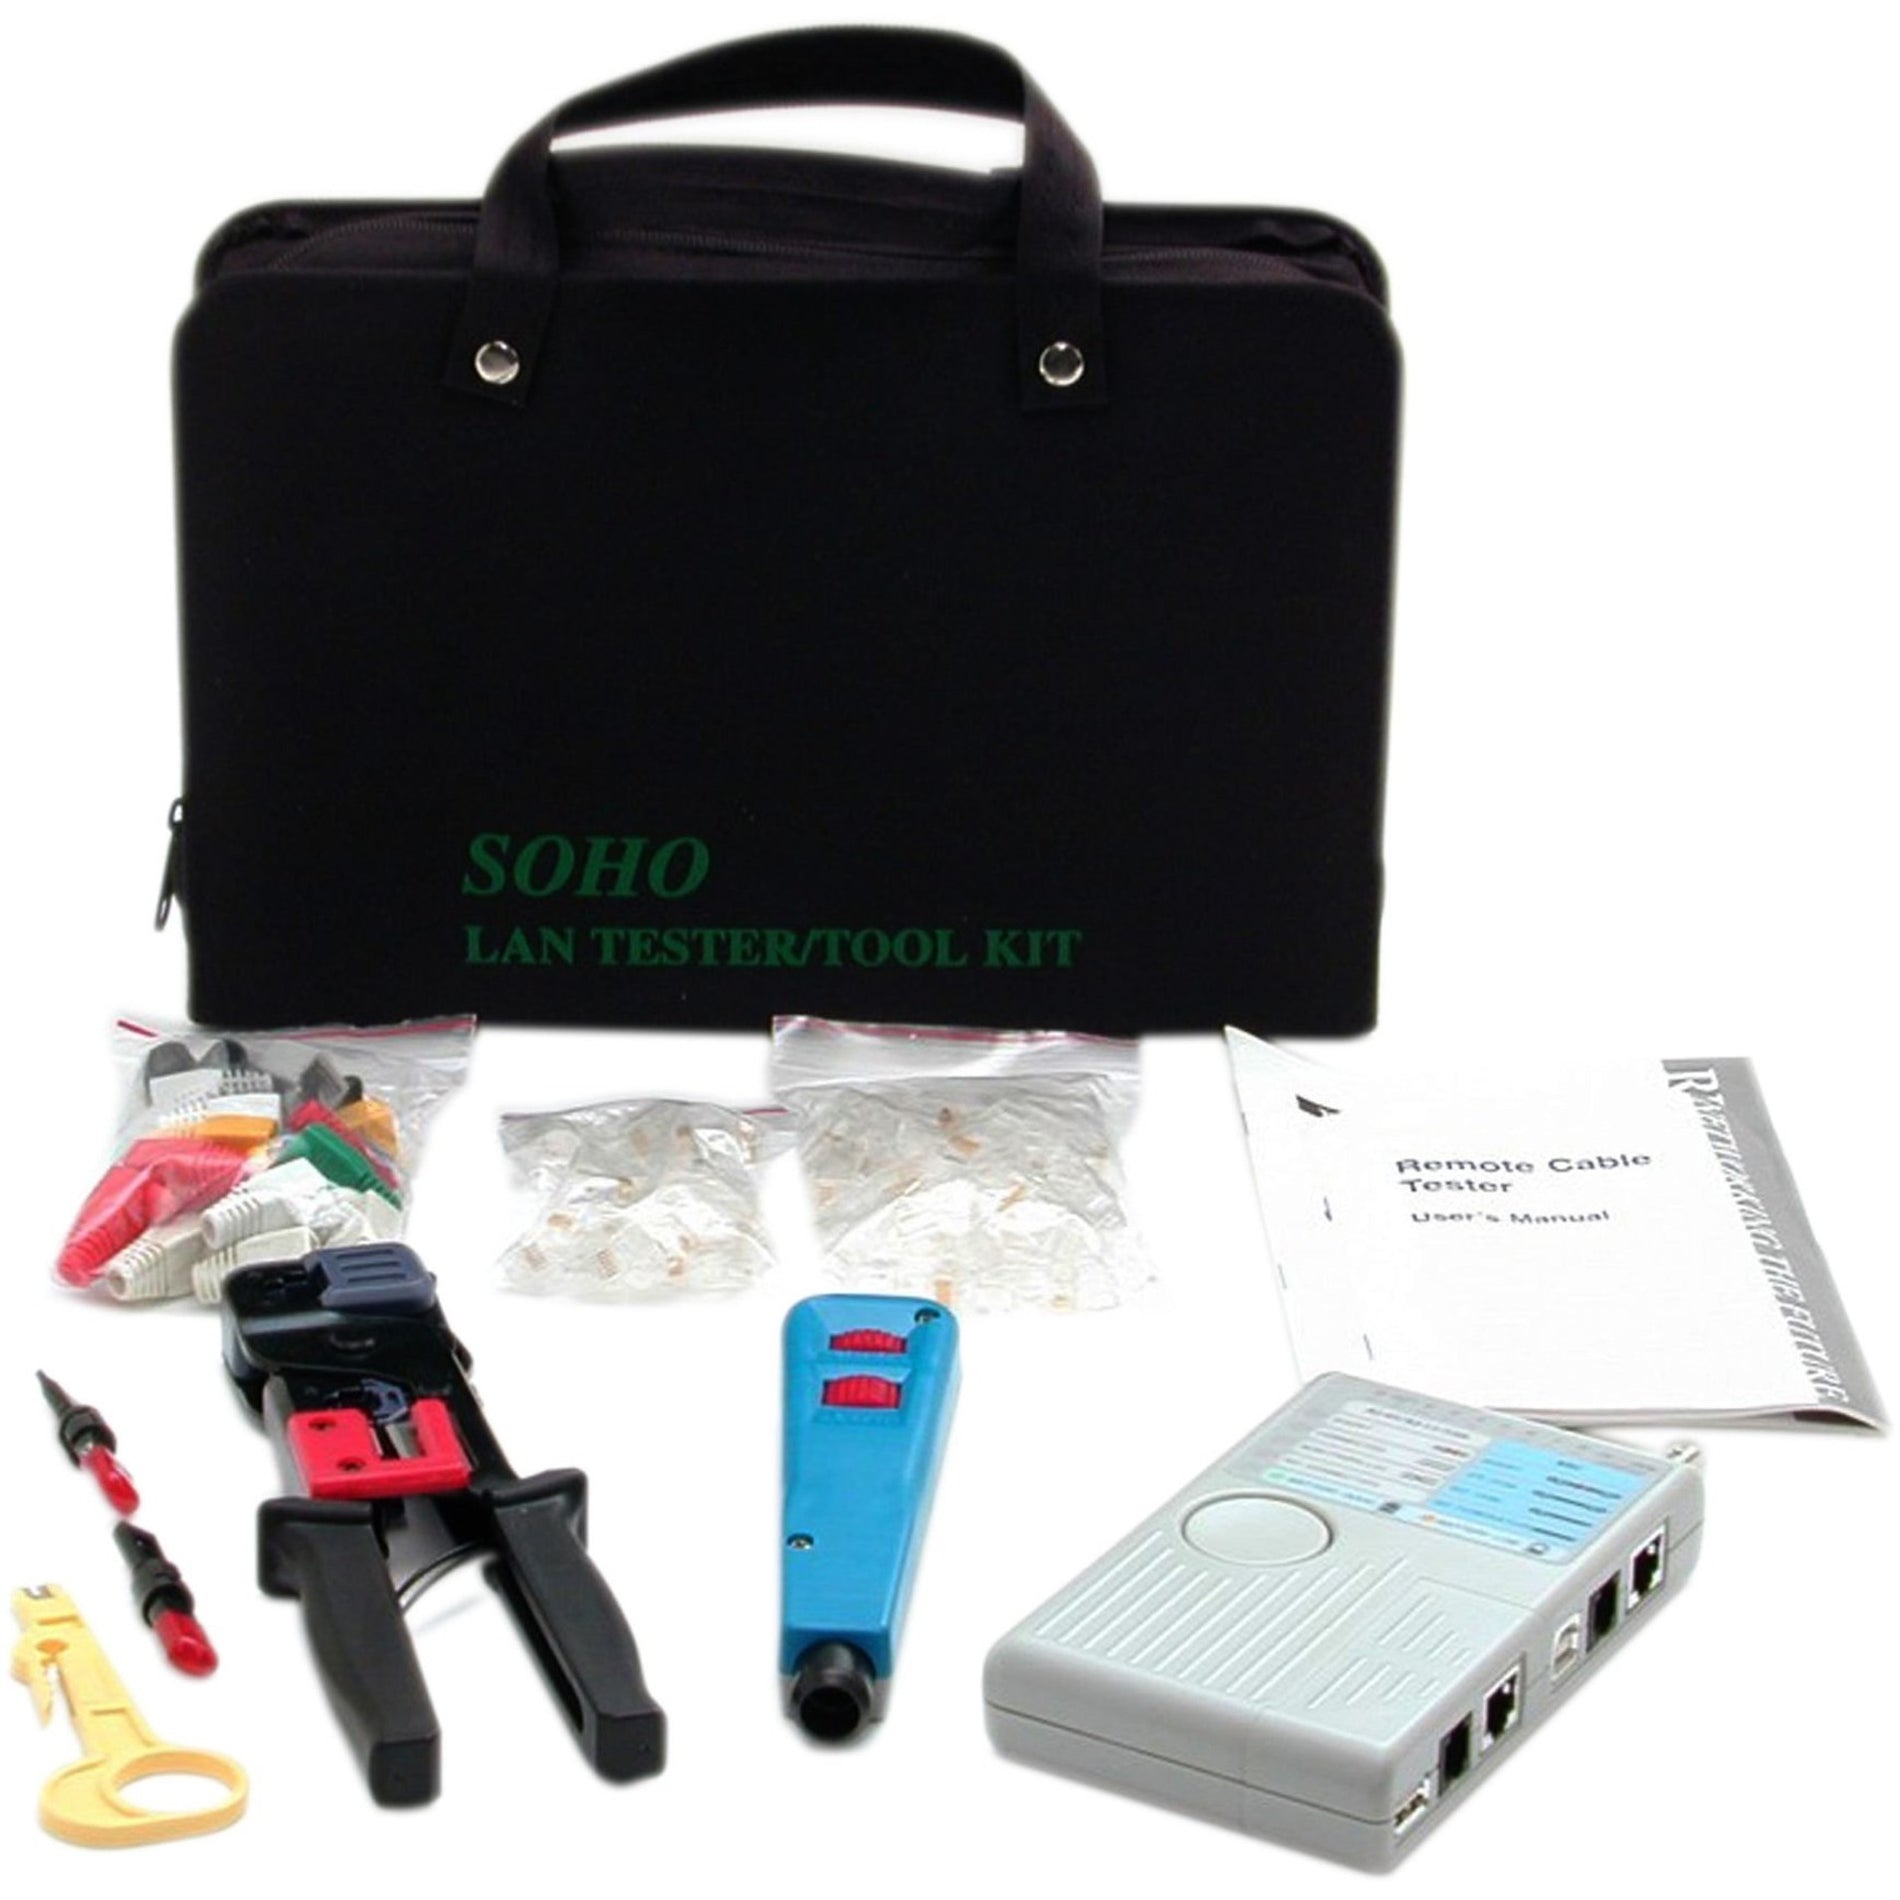 StarTech.com CTK400LAN Professional RJ45 Network Installer Tool Kit with Carrying Case, Limited Warranty 2 Year